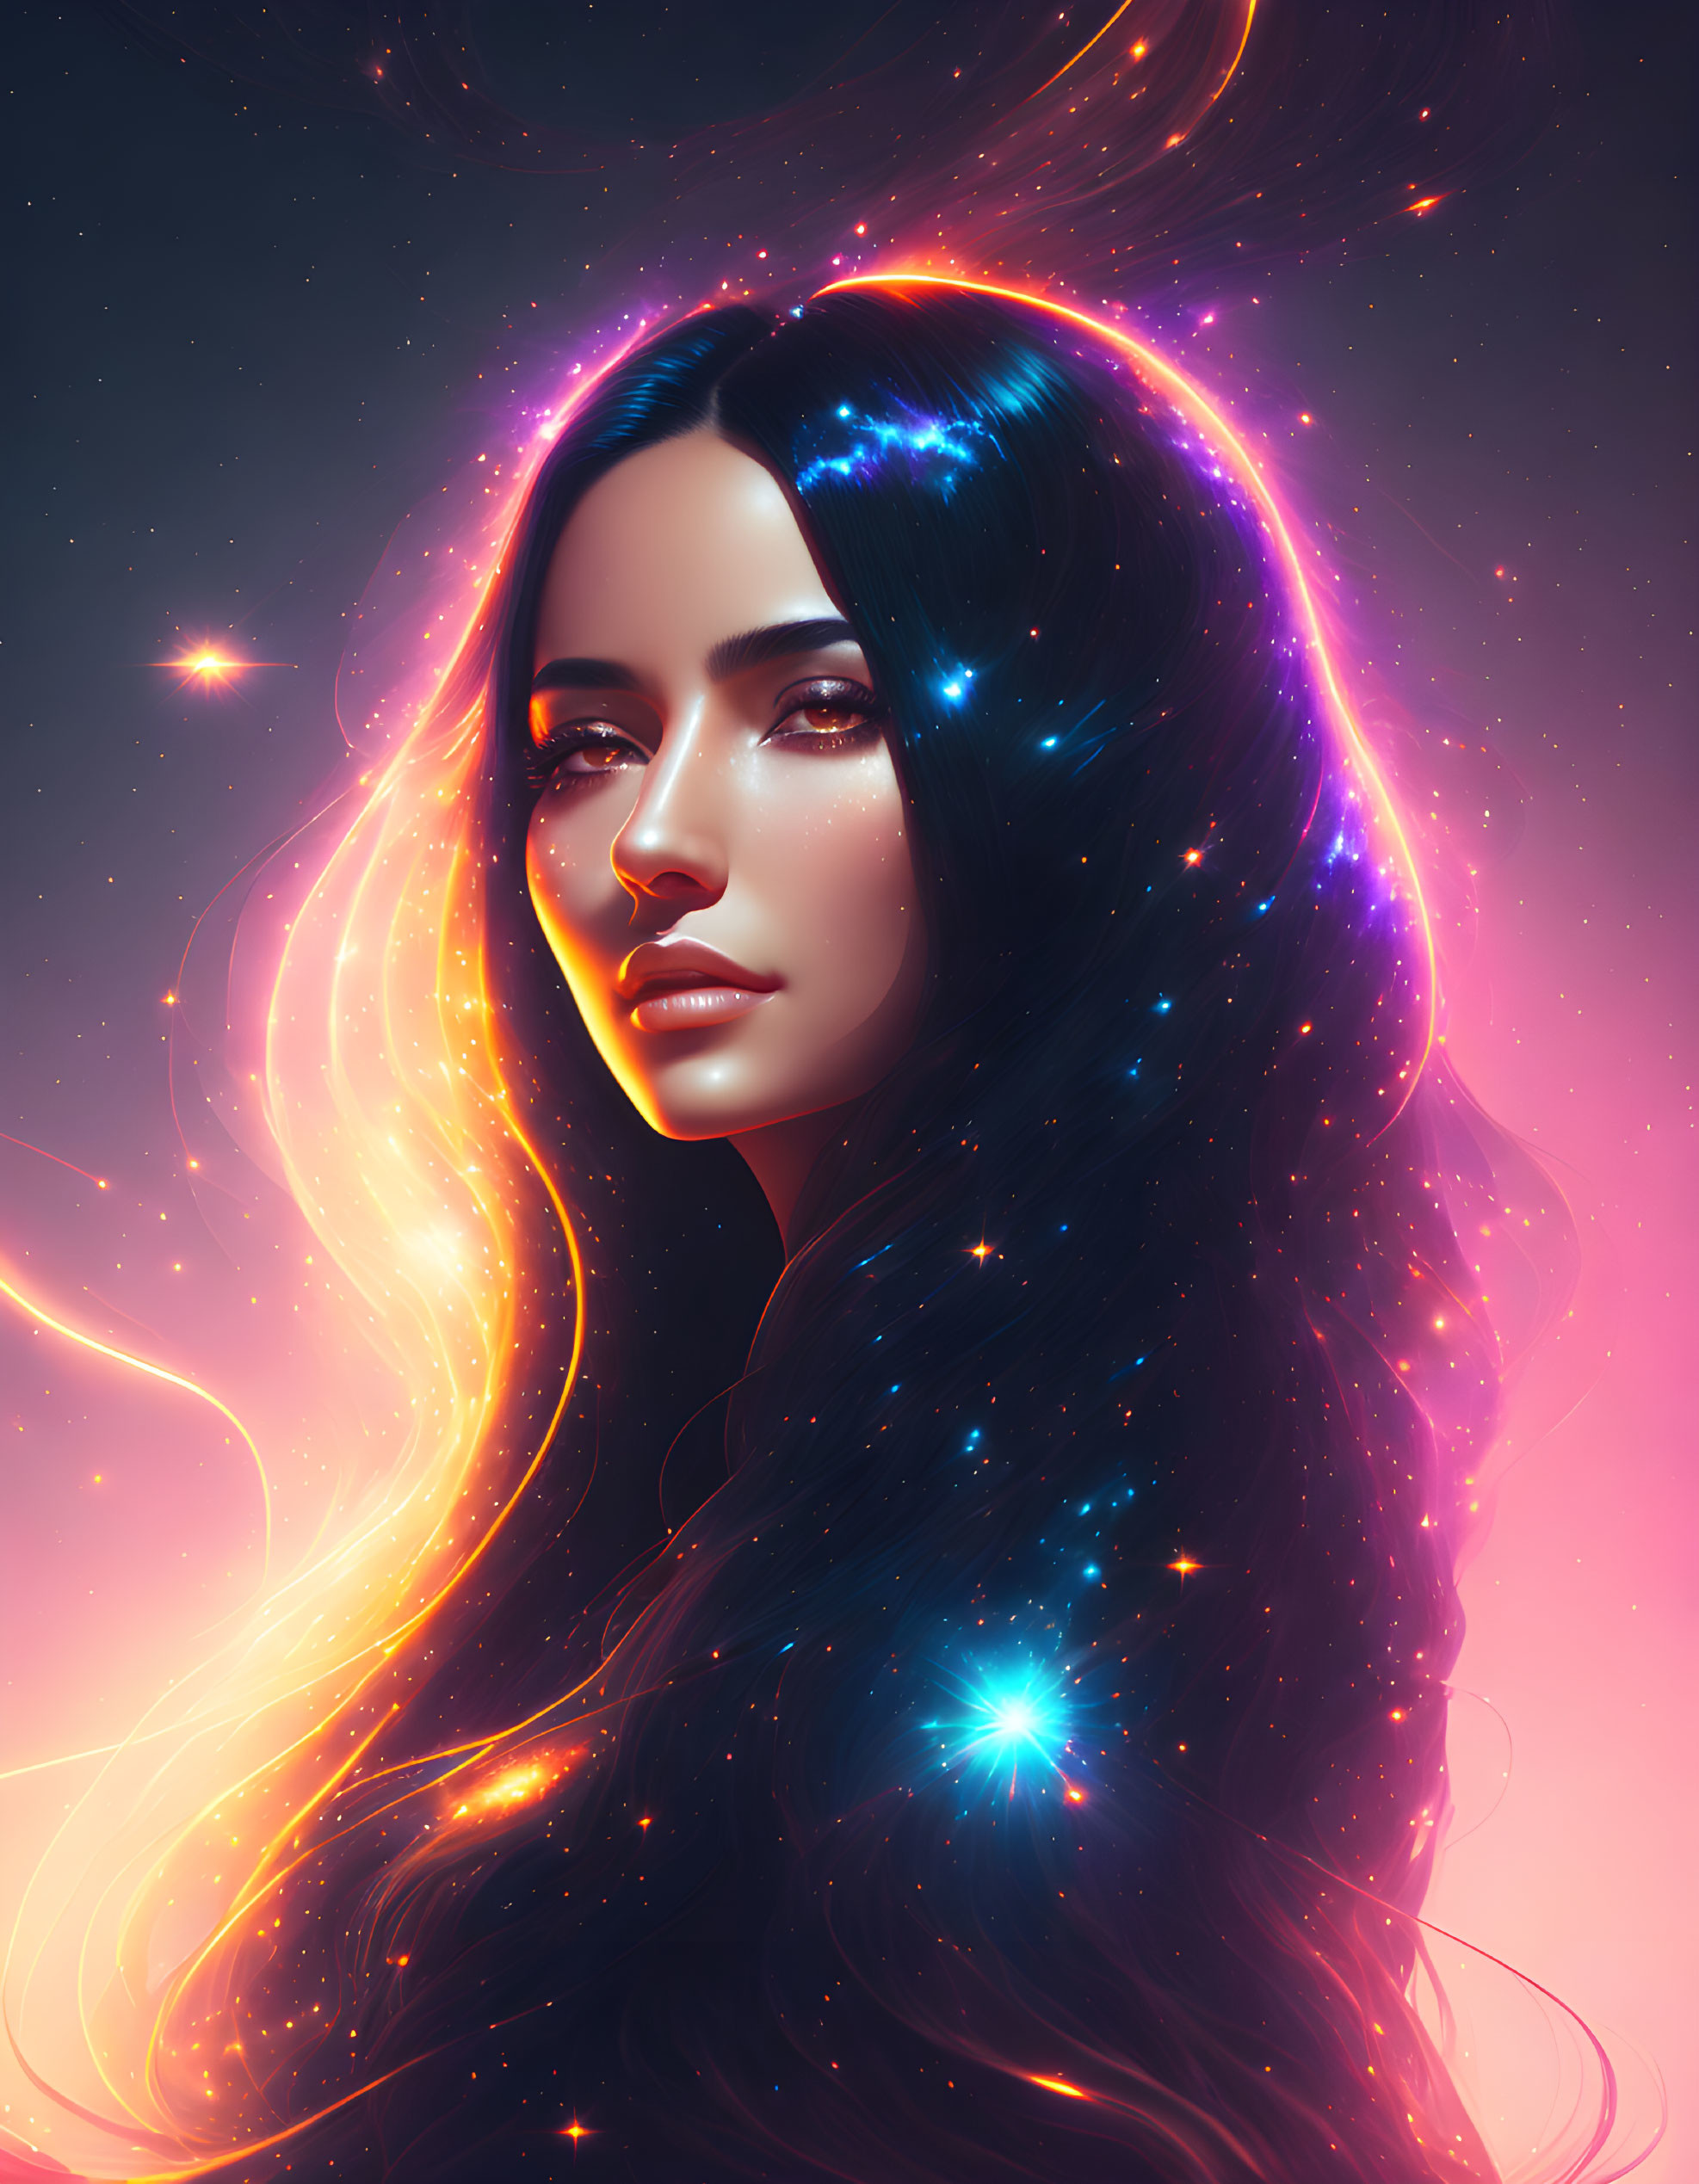 Digital portrait of woman with cosmic hair in starry setting